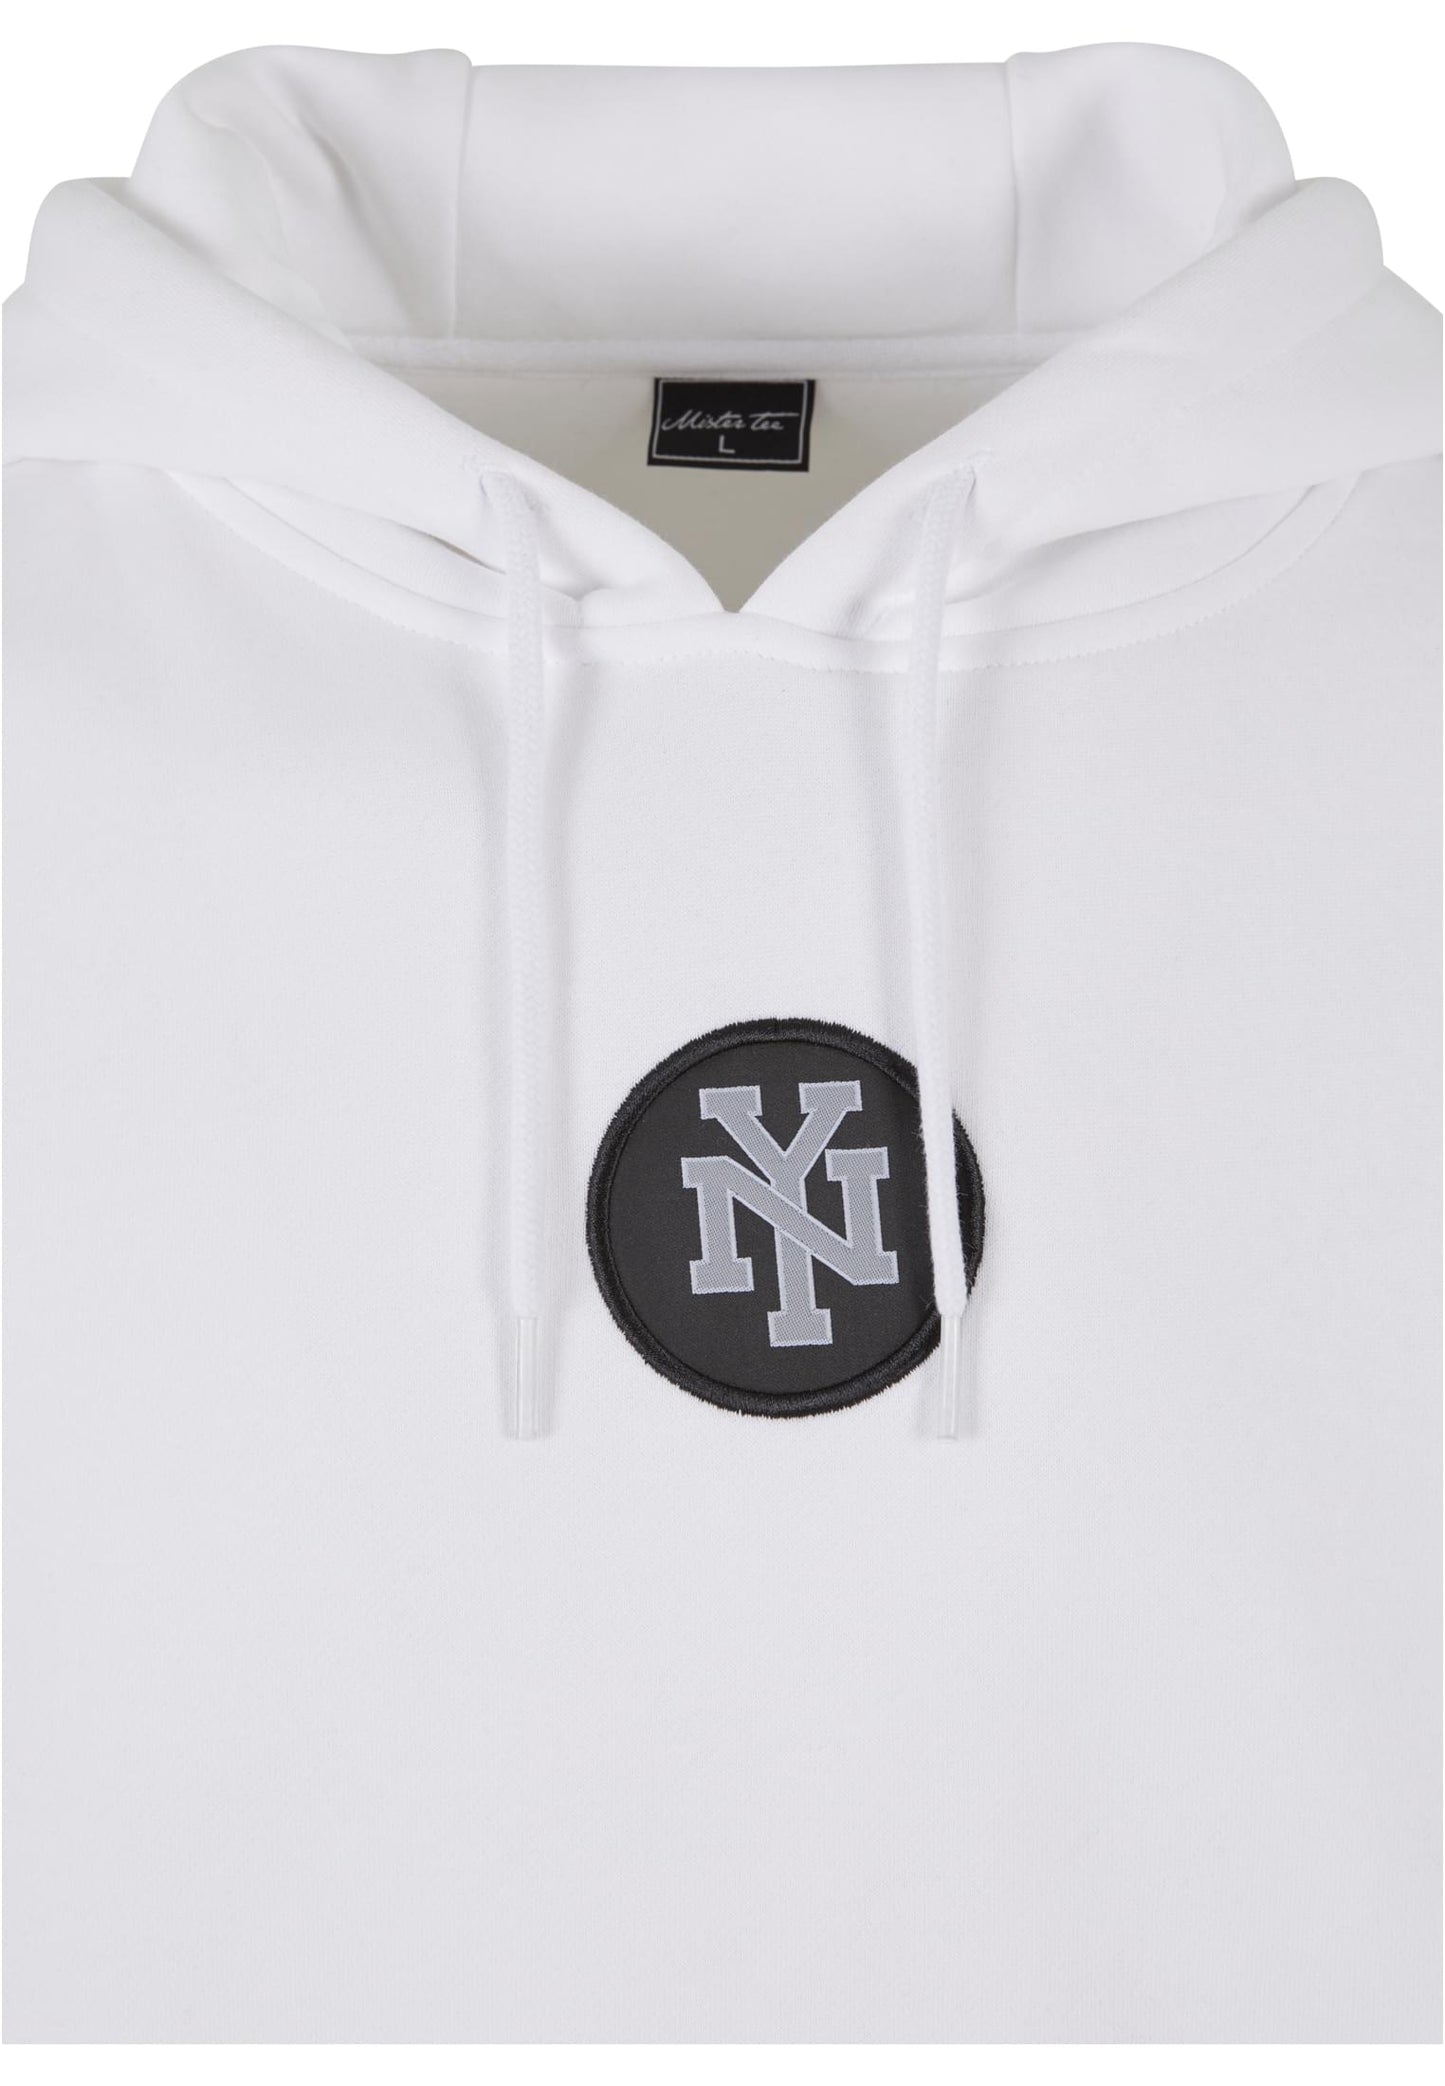 Mister Tee NY Patch Hoody white im BAWRZ® One Stop Hip-Hop Shop